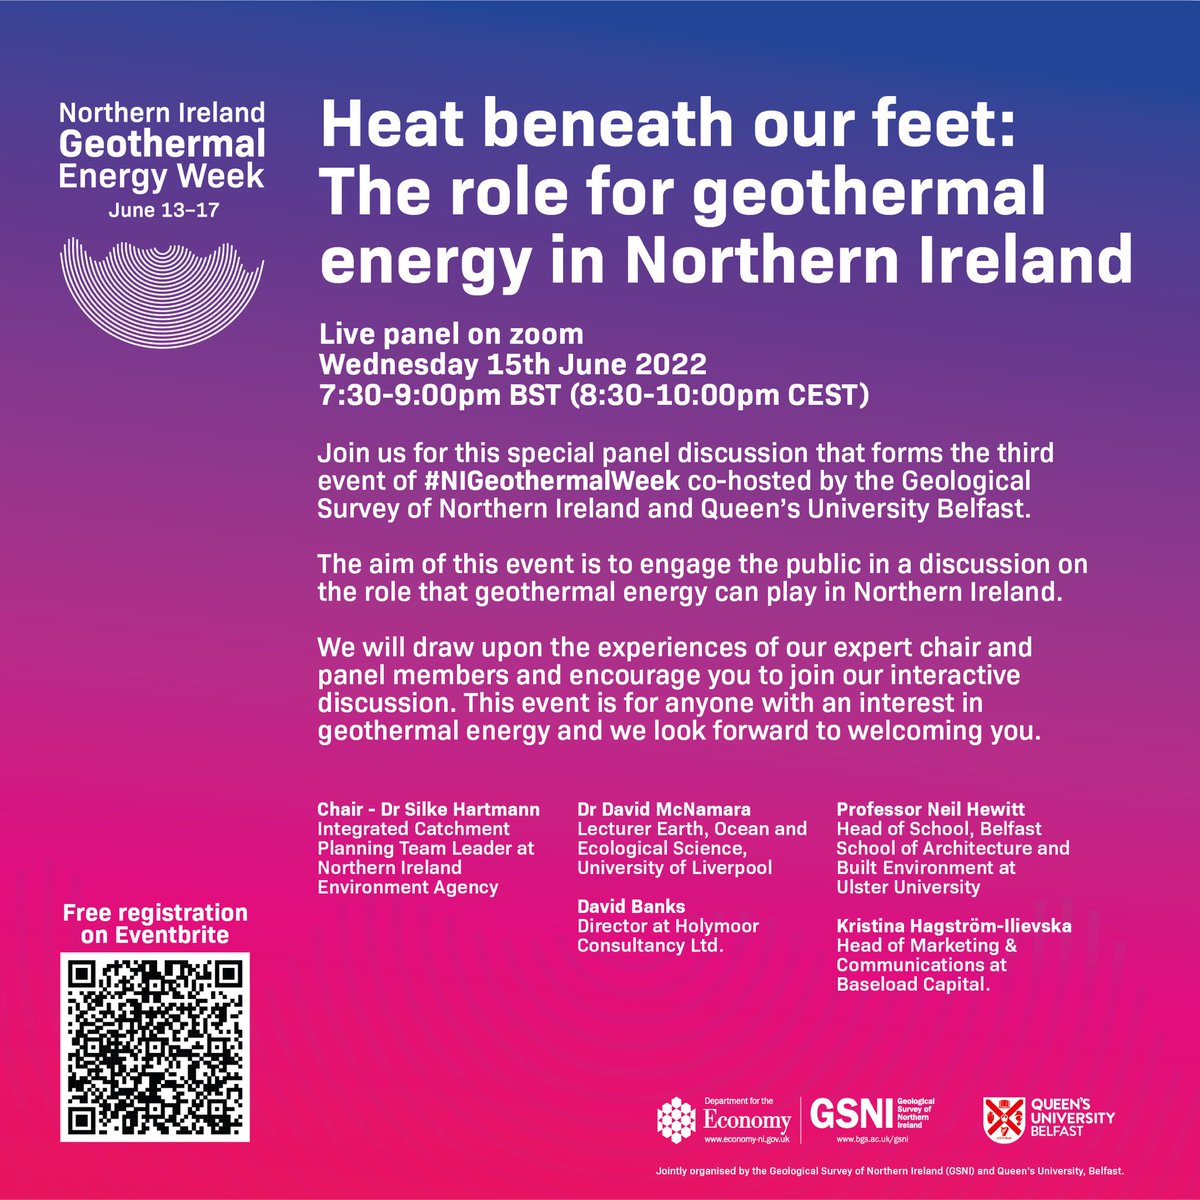 If you’d like to find out more about #geothermalenergy we’re hosting a public panel discussion on the 15th June as part of #nigeothermalweek. Register for free (eventbrite.com/e/heat-beneath…) and join us to learn more about the heat beneath our feet and the role of geothermal energy.